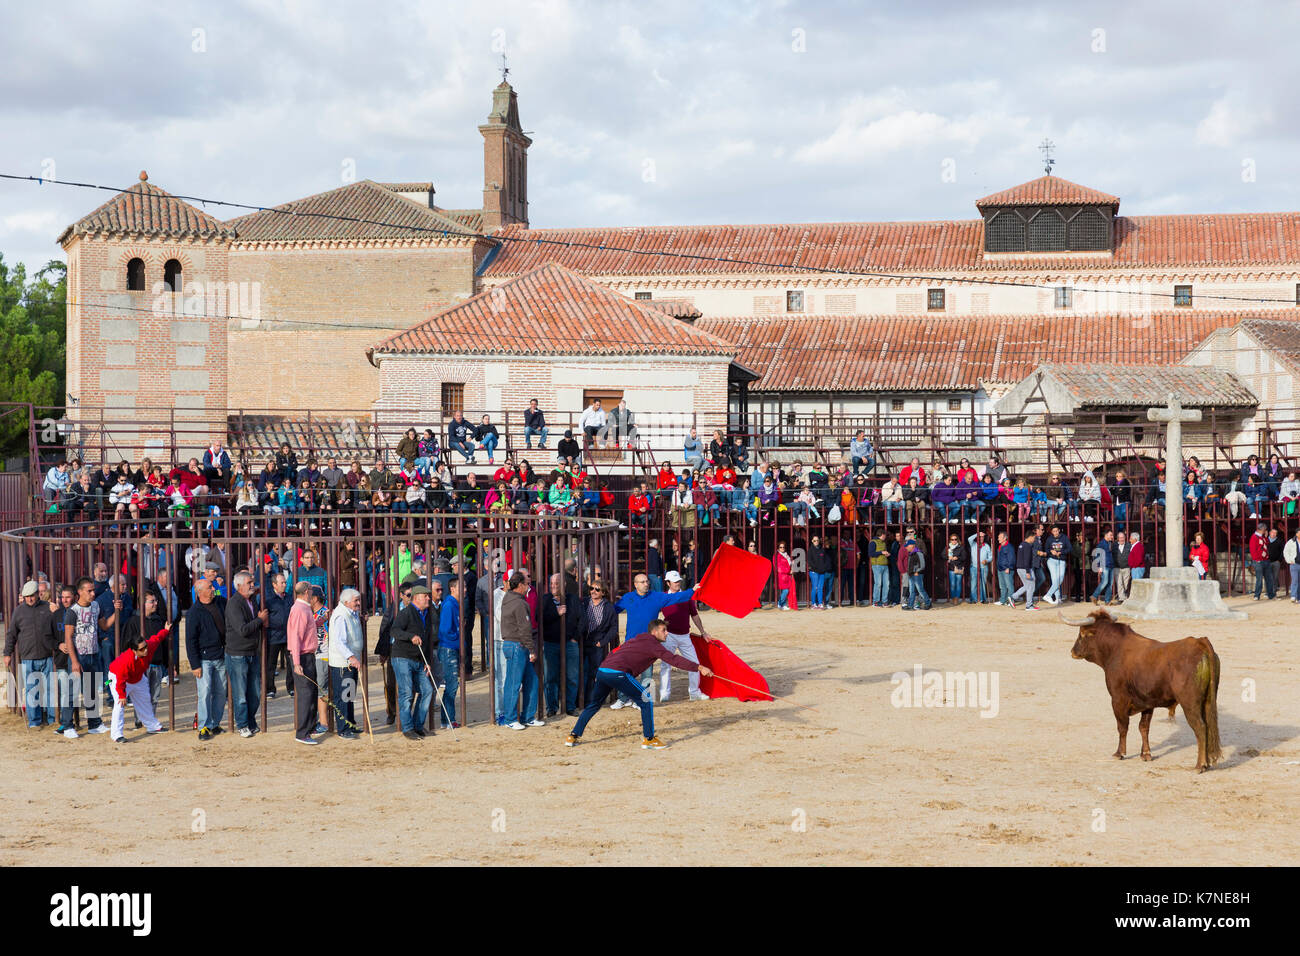 Local people challenging bull with red flag during traditional festival at Madrigal de los Altas Torres in province of Avila, Spain Stock Photo